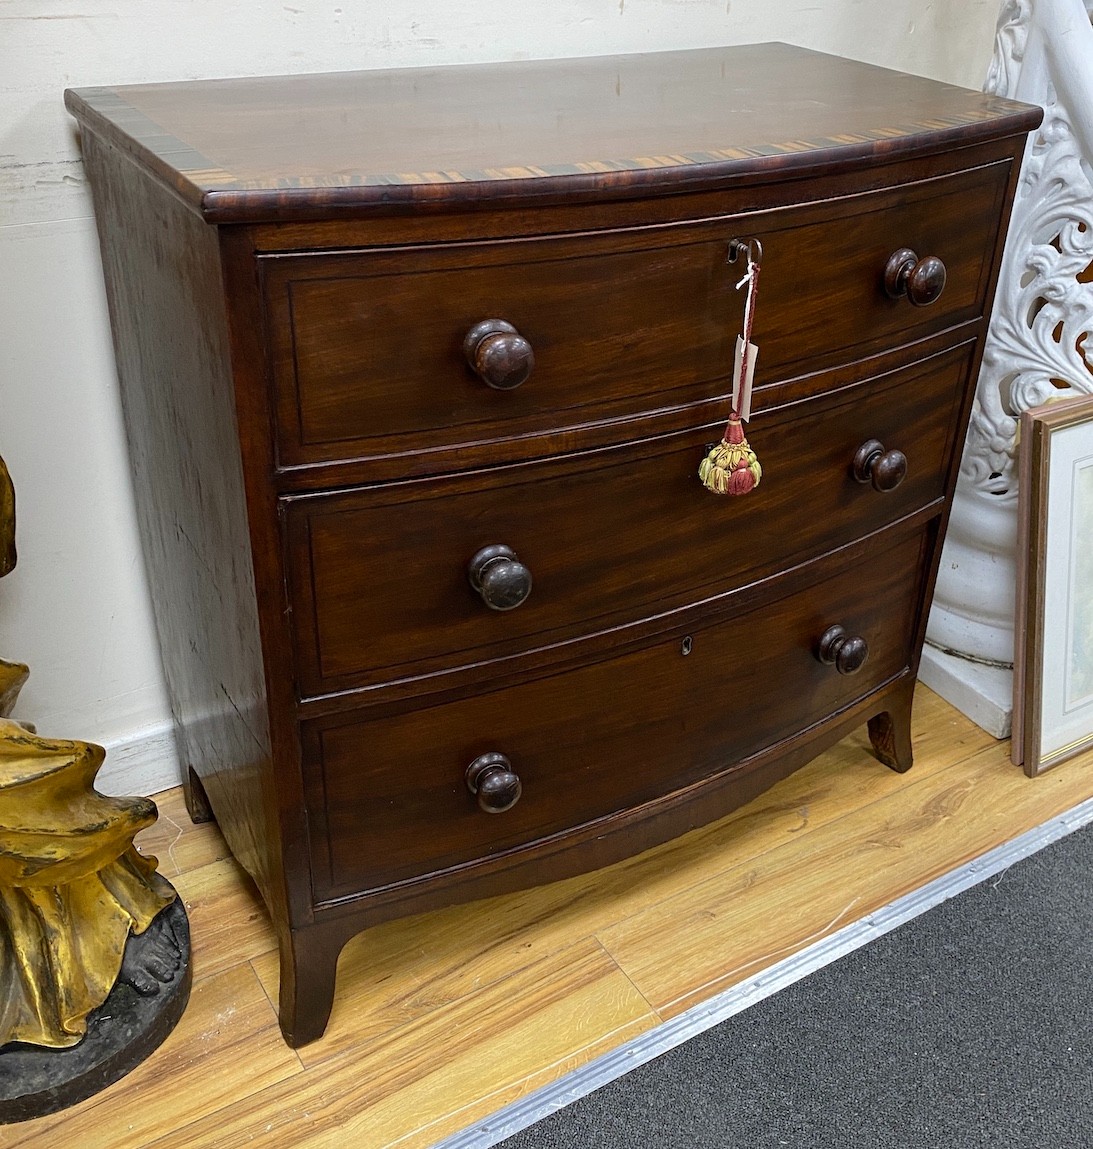 A late Regency coromandel banded mahogany bowfront chest of three drawers, height 85.5cm, width 86cm, depth 47cm